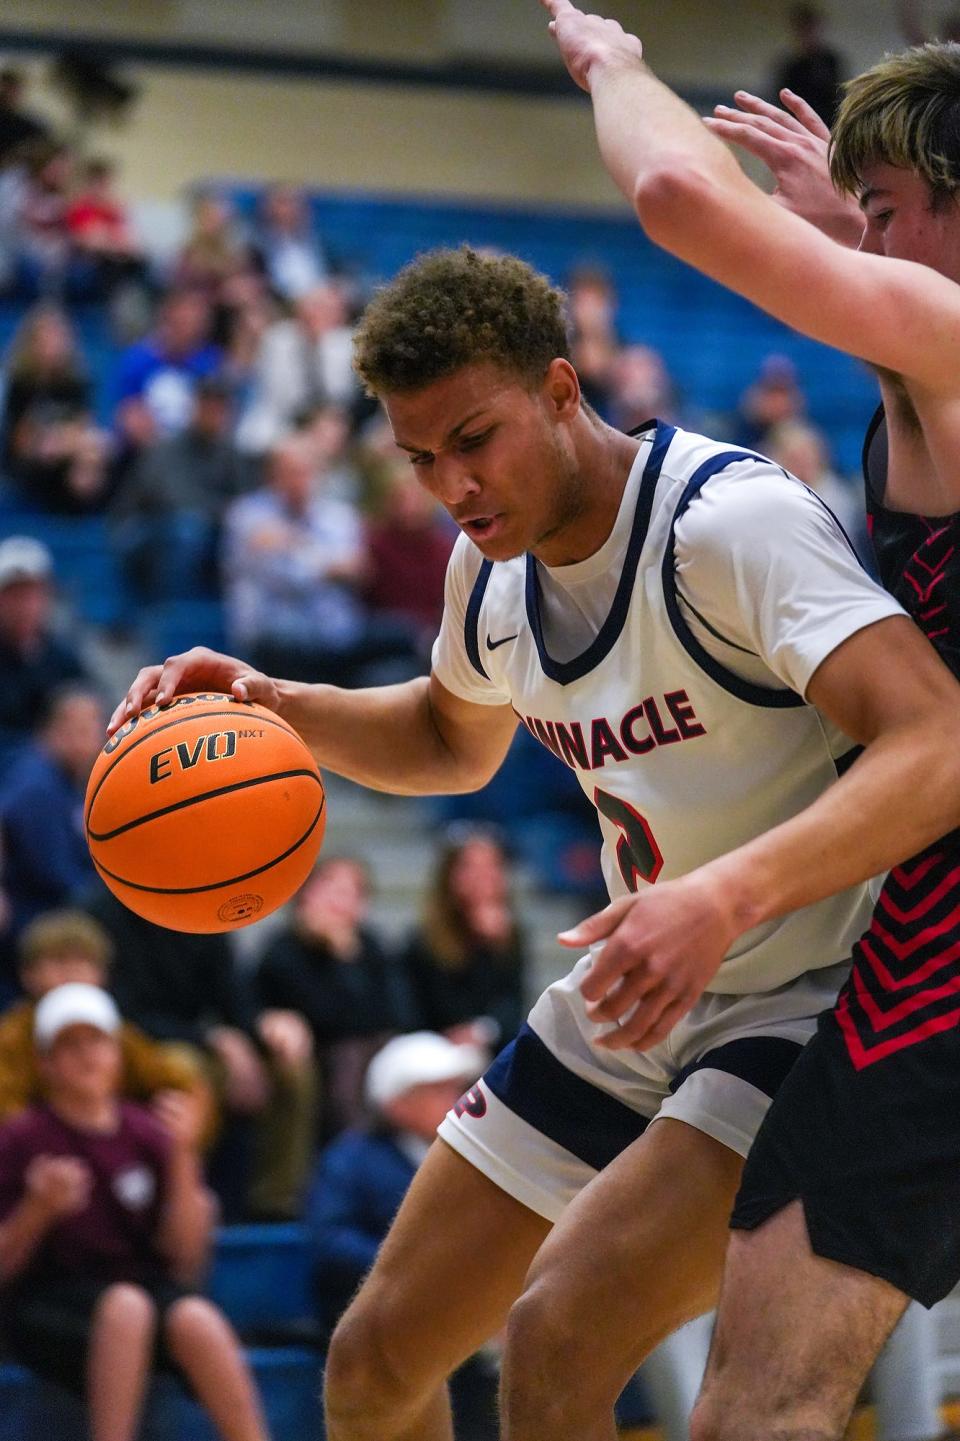 Pinnacle's Duce Robinson (2), left, drives to the basket while guarded by Liberty's Trevor Owens (24), right, dribbles the ball up the court during the first half against Liberty High School at Pinnacle High School on Thursday, Feb. 17, 2022, in Phoenix.